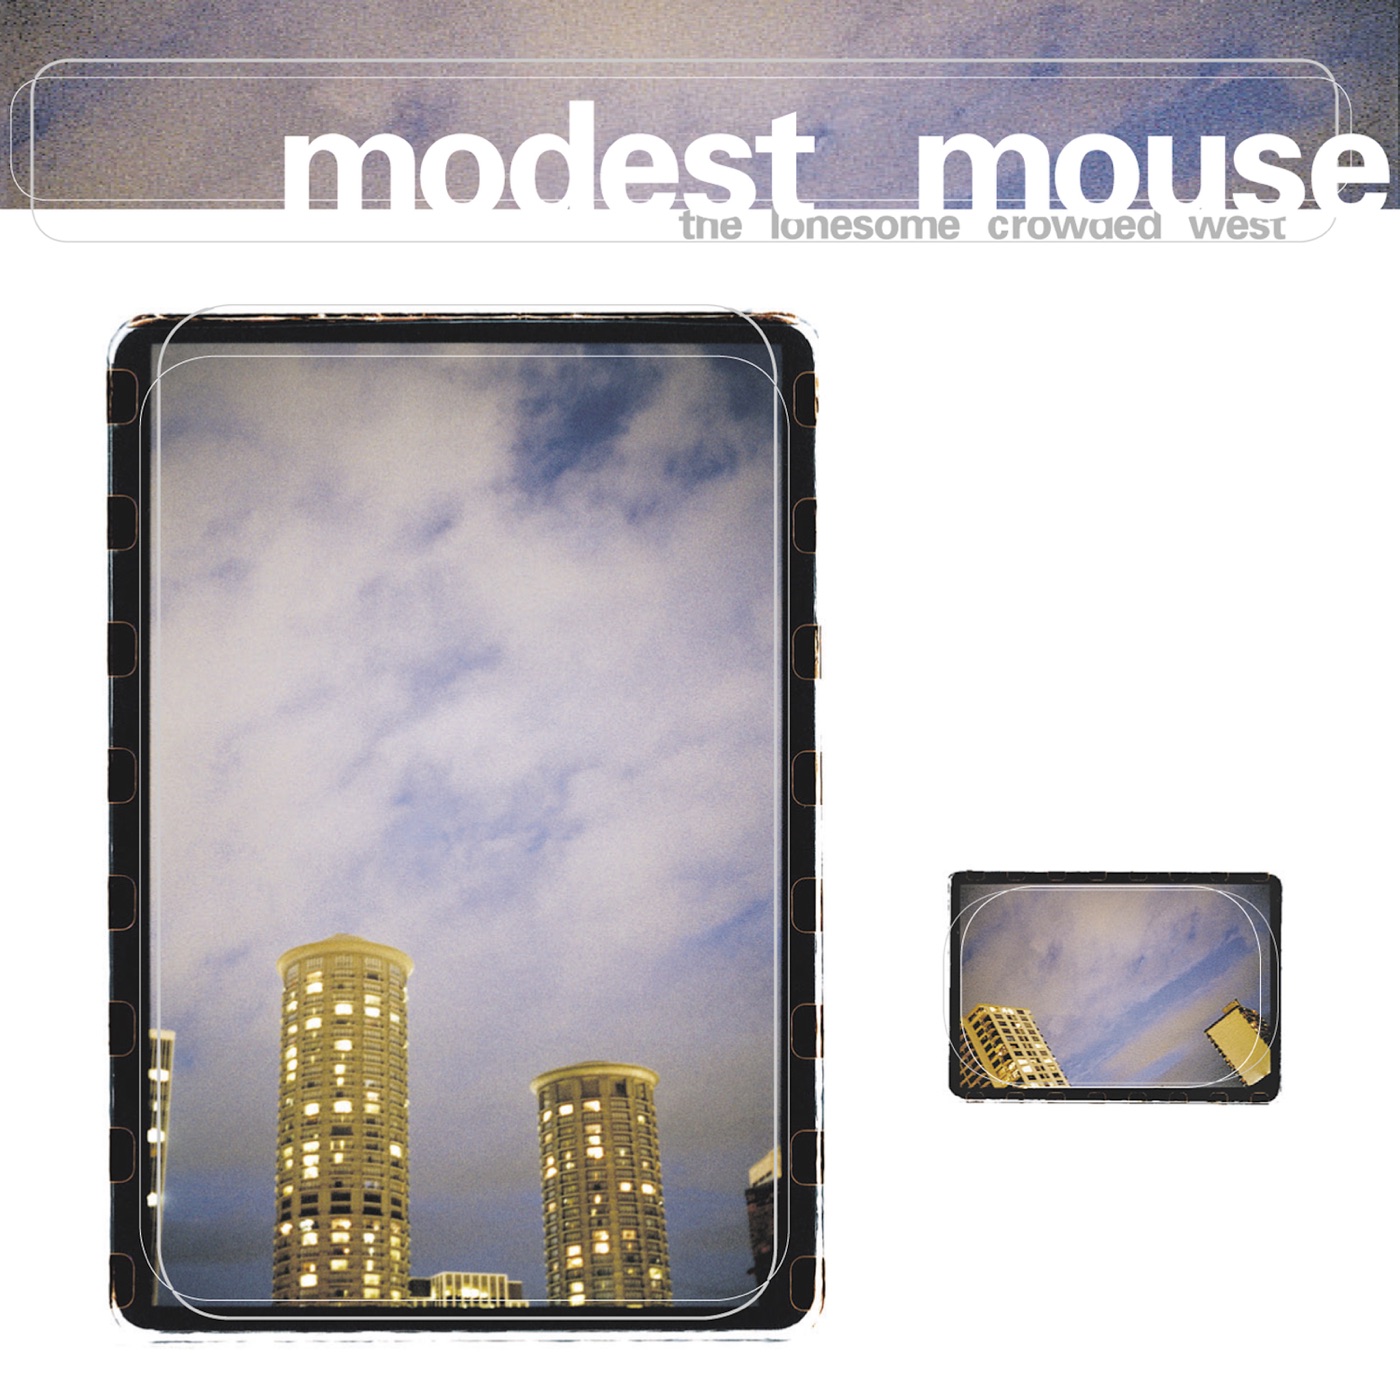 The Lonesome Crowded West by Modest Mouse